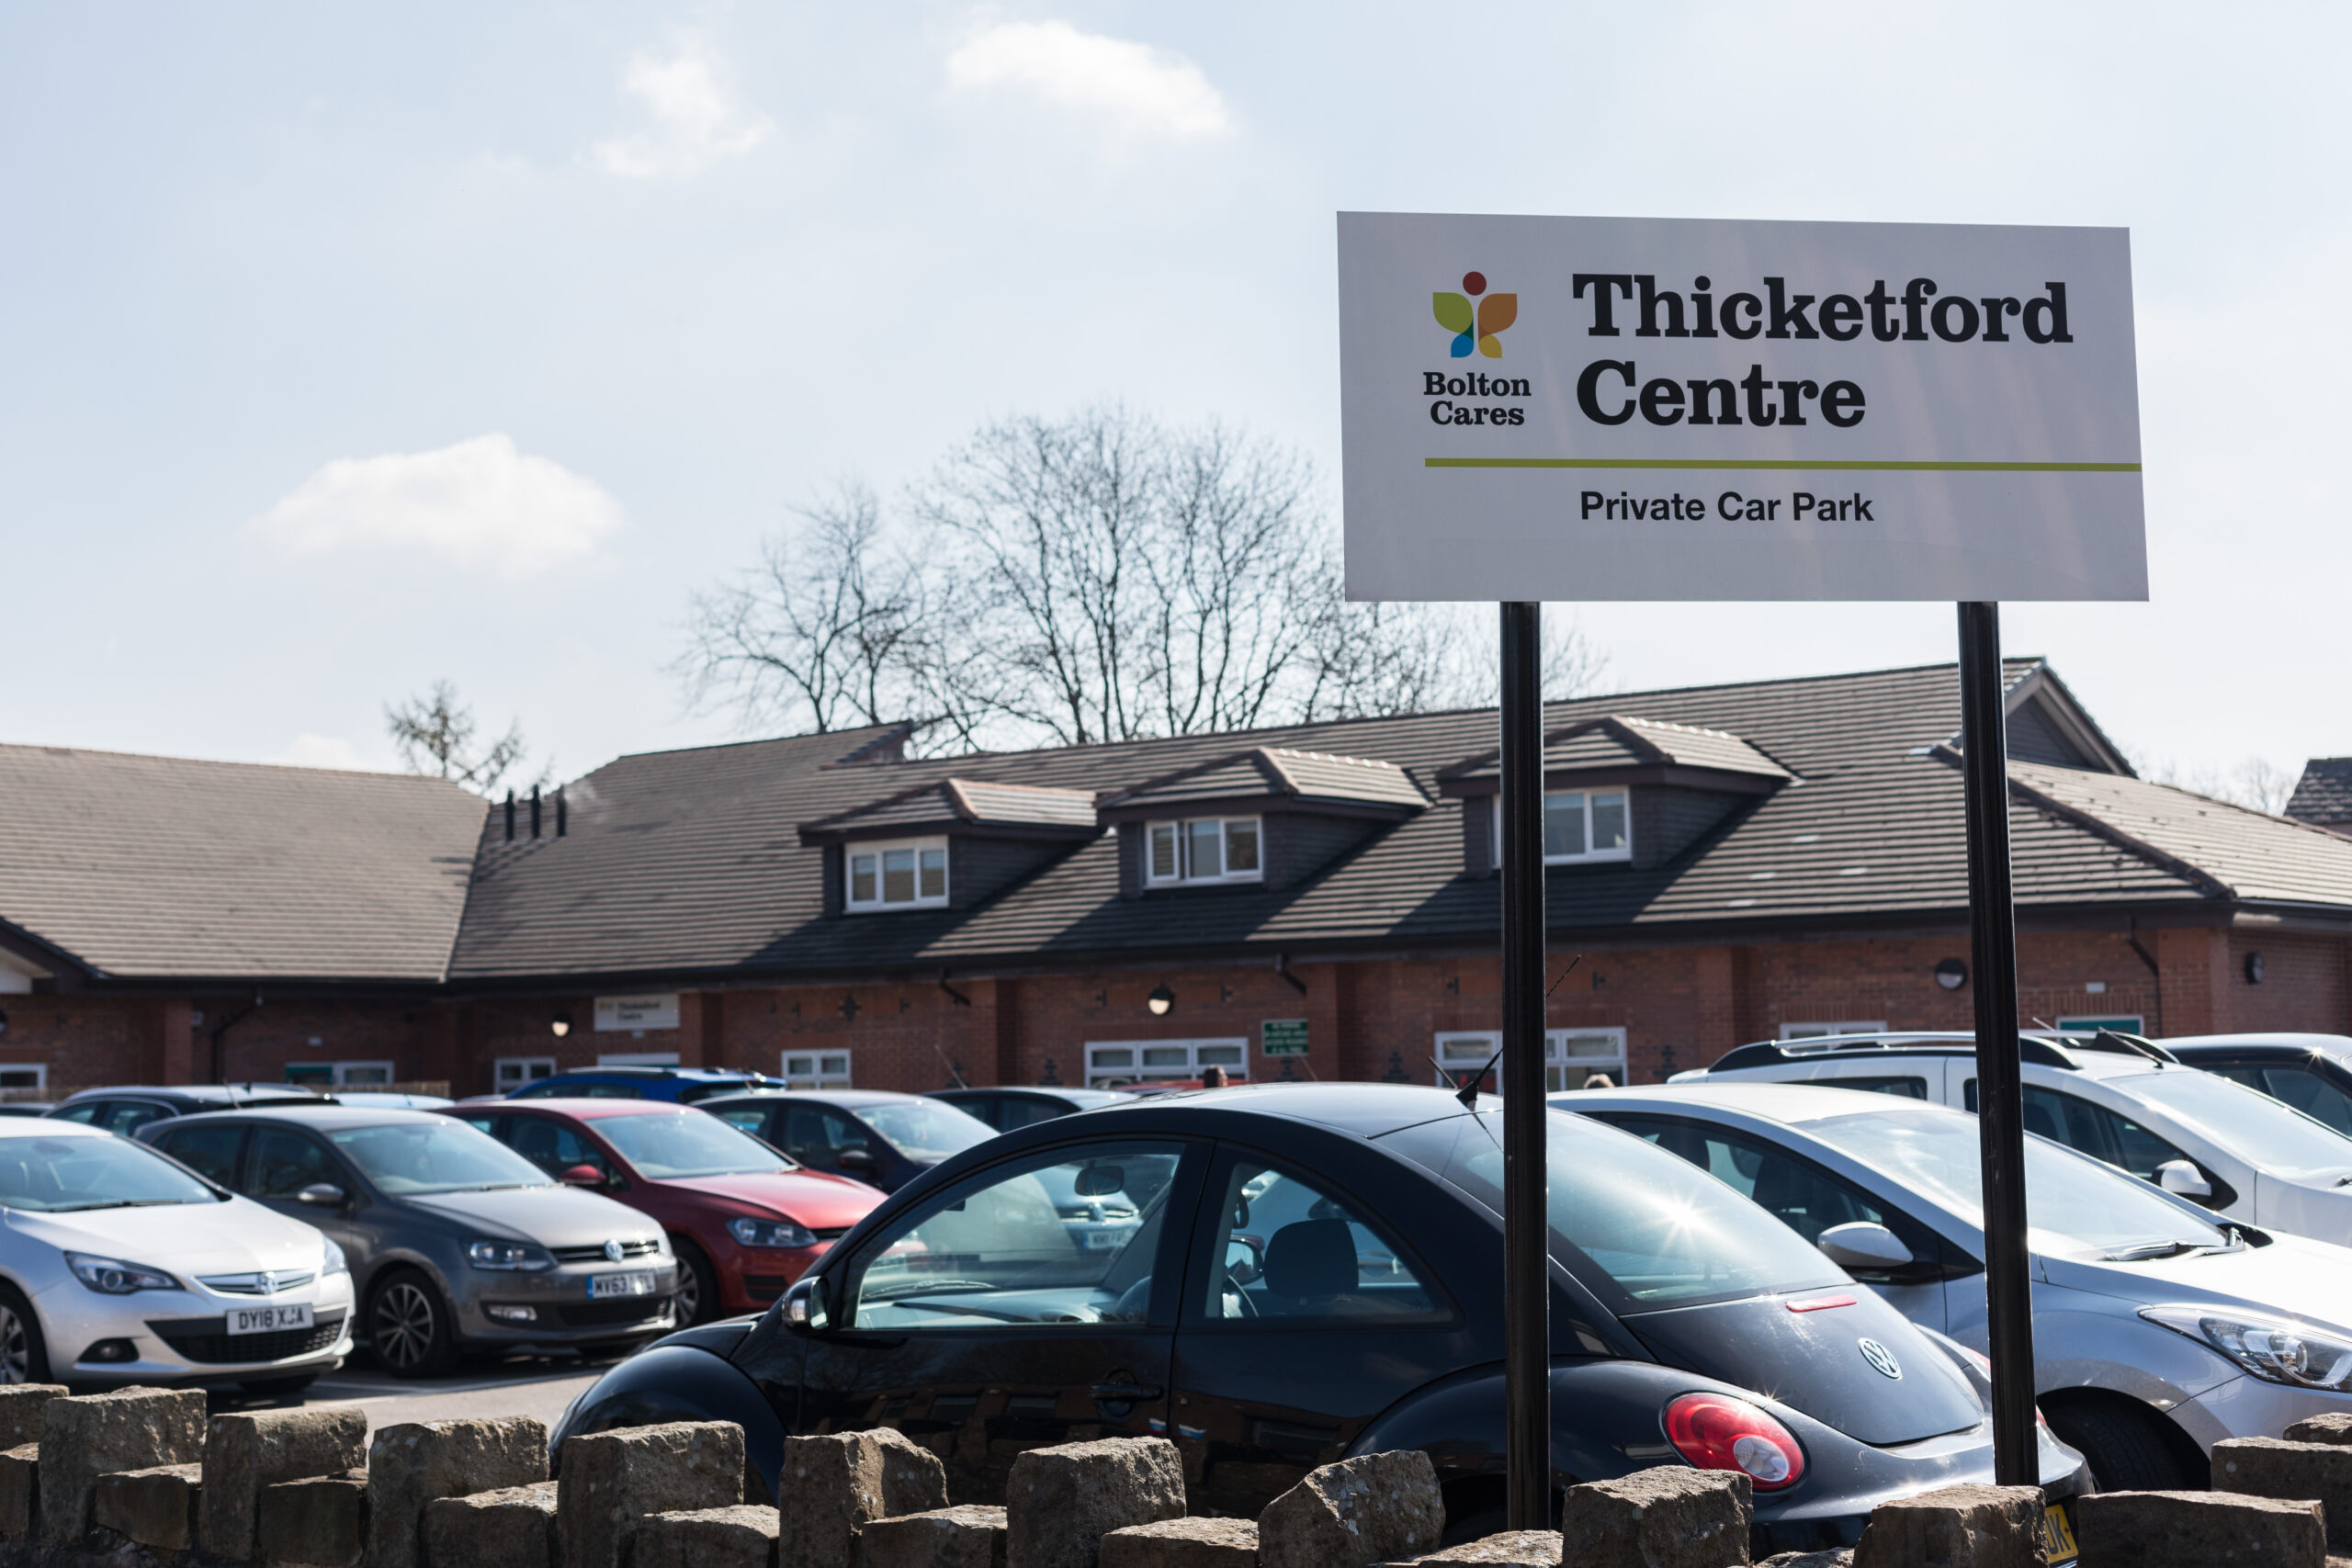 The Thicketford Centre